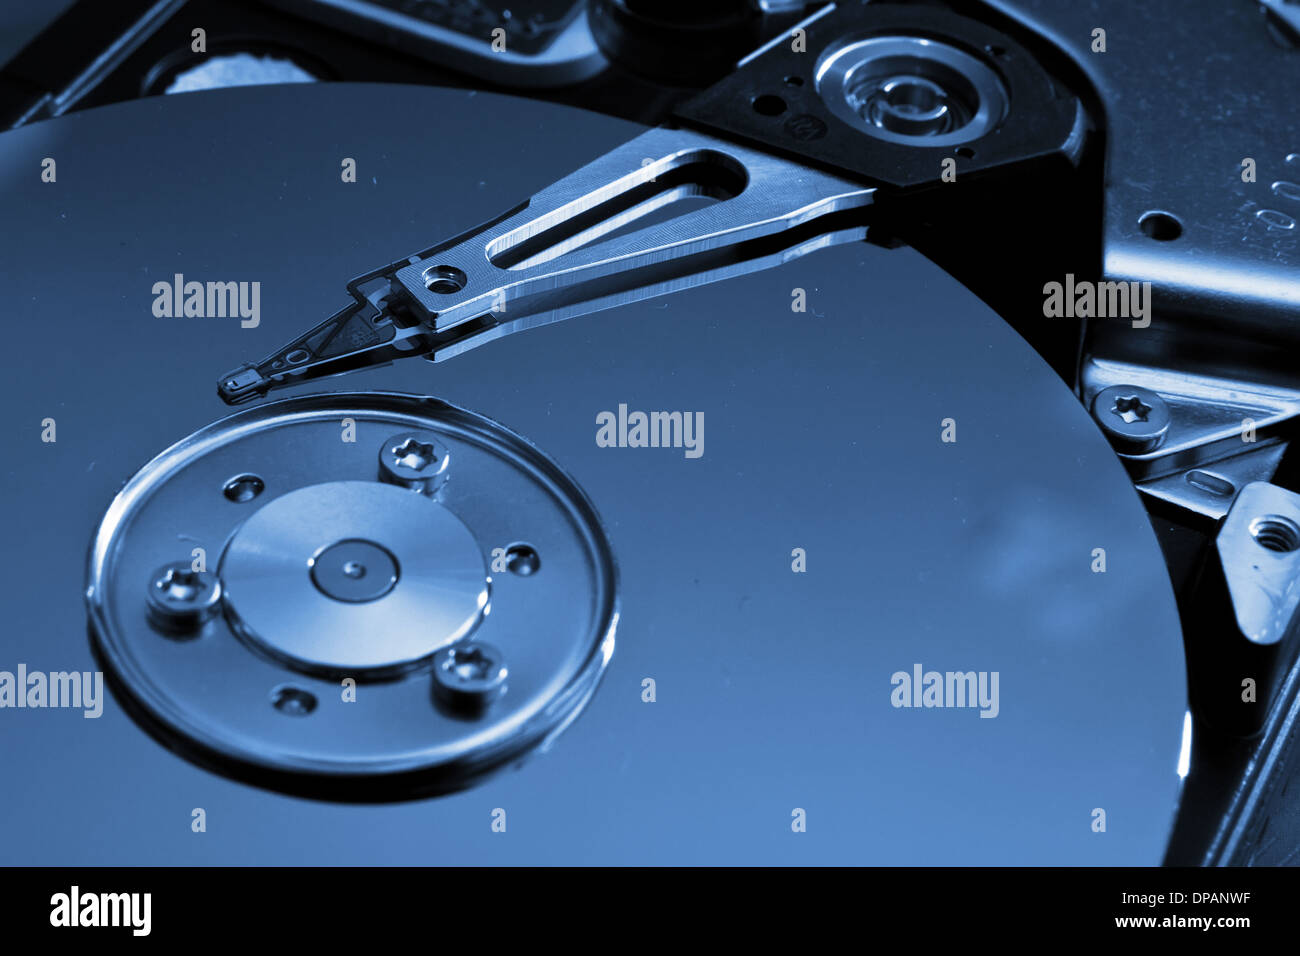 Close-up of the opened Hard Disk Drive Stock Photo